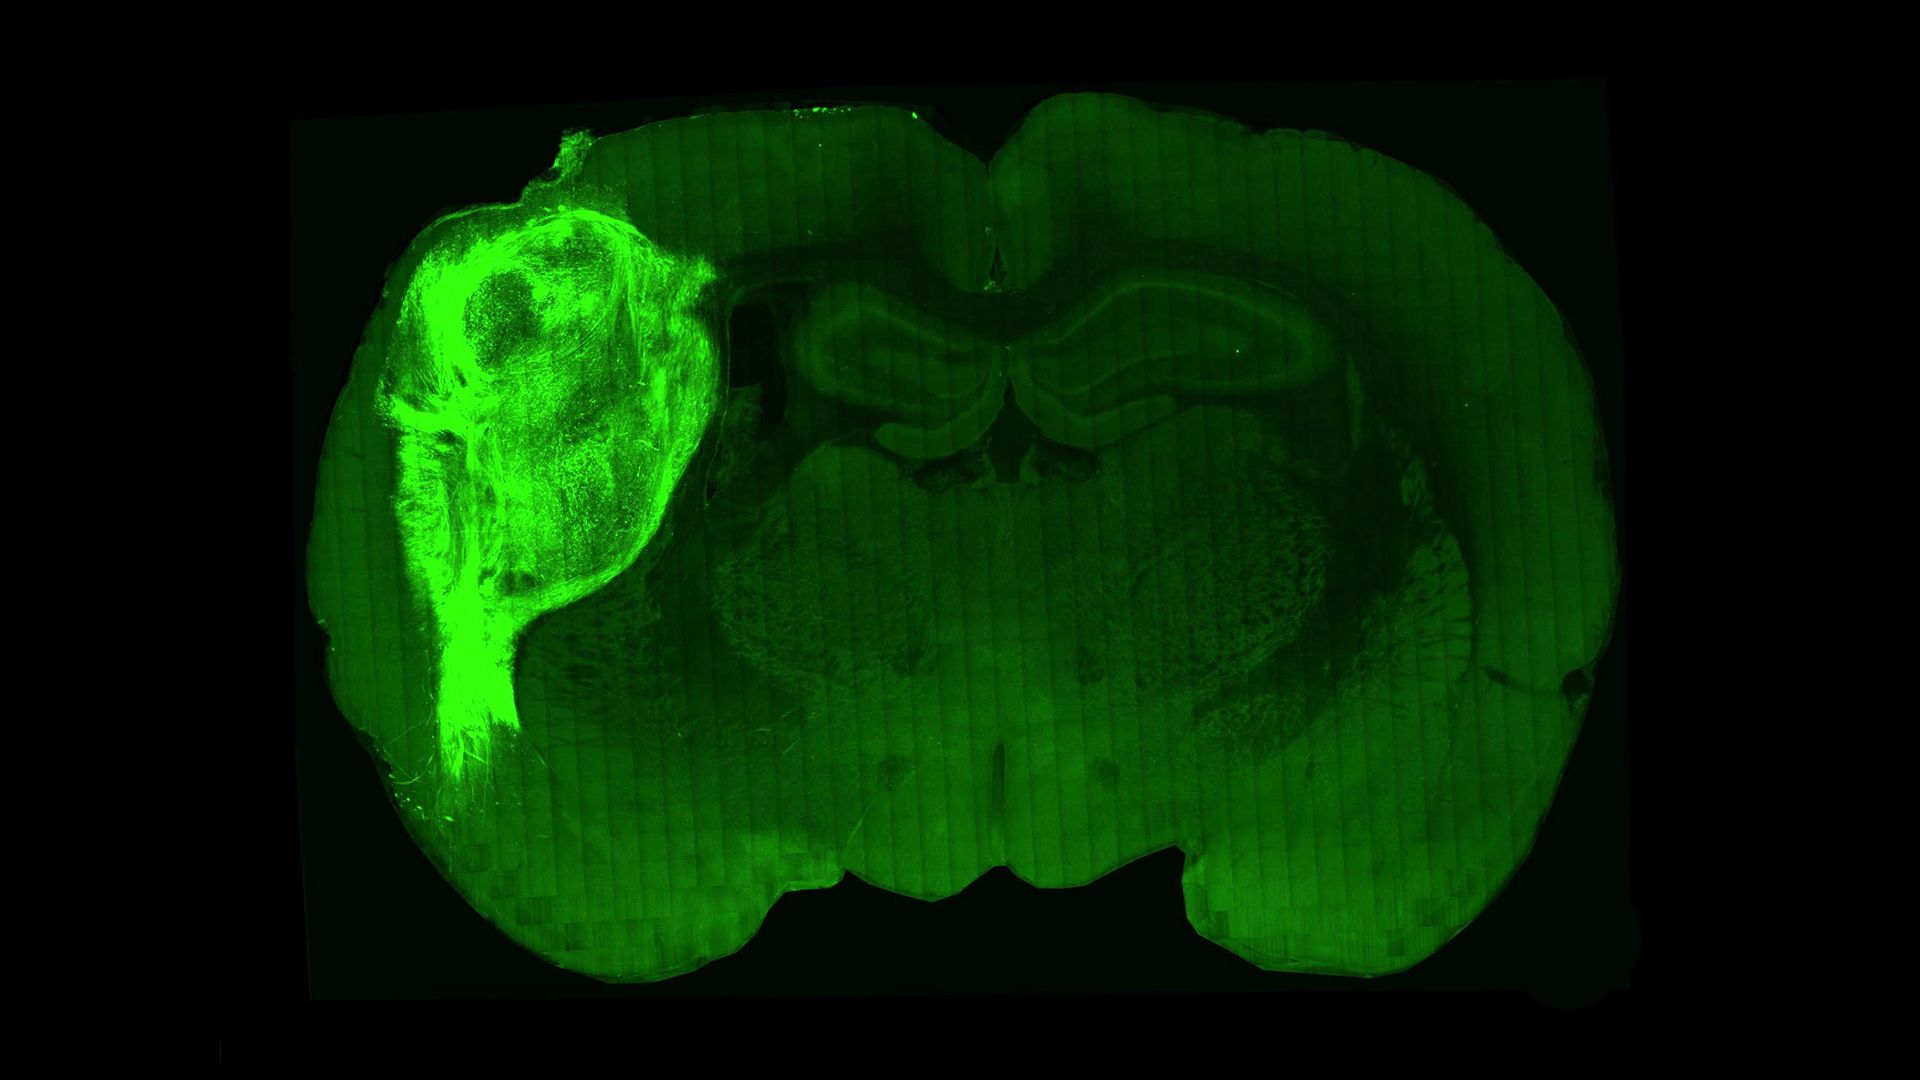 Cross-section of a rat brain shows tissue from a human brain organoid in brighter green